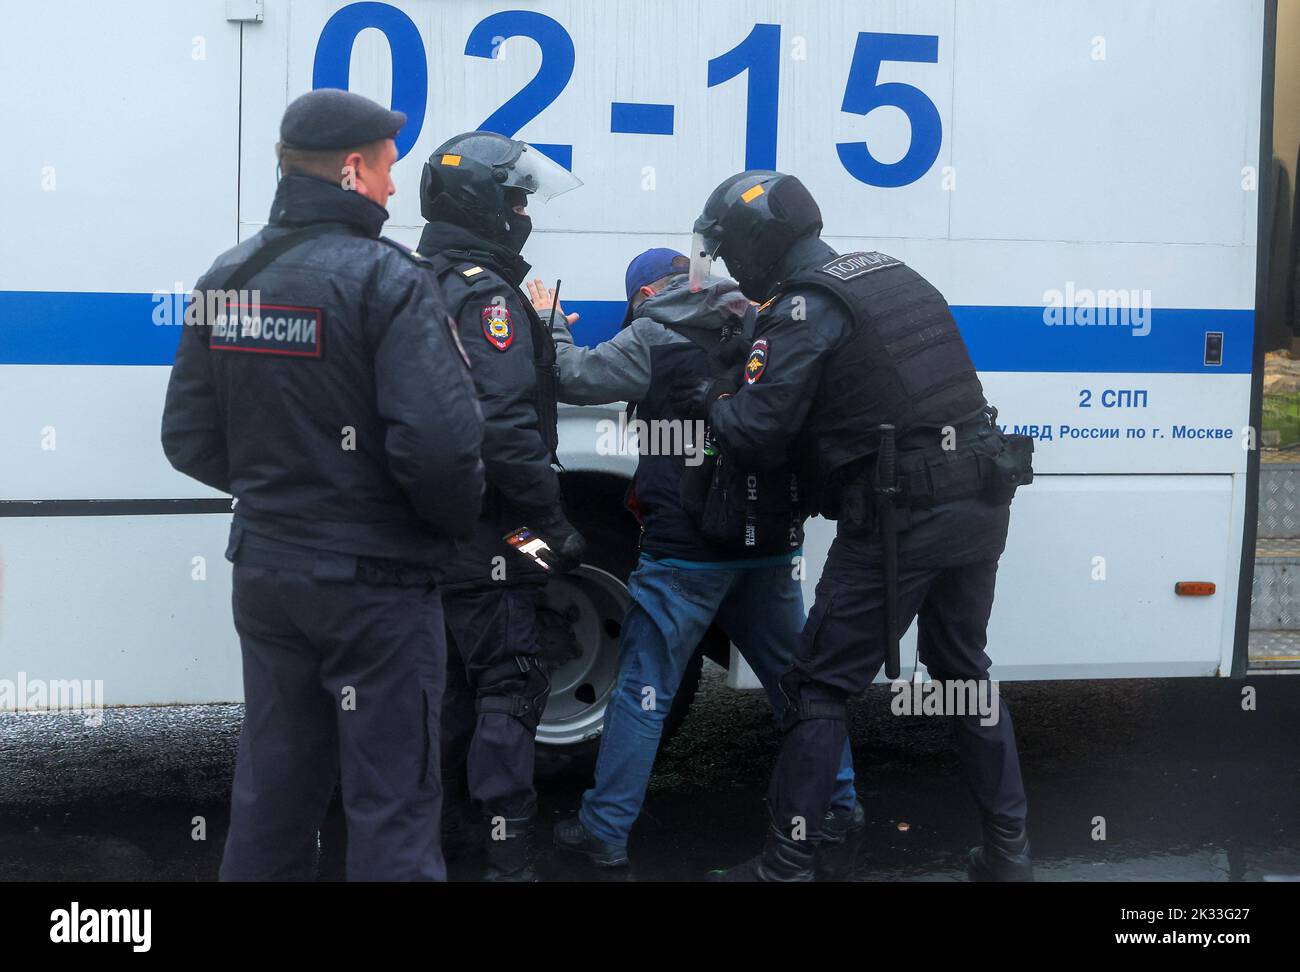 Russian law enforcement officers detain a person during a rally, after opposition activists called for street protests against the mobilisation of reservists ordered by President Vladimir Putin, in Moscow, Russia September 24, 2022. REUTERS/REUTERS PHOTOGRAPHER Stock Photo